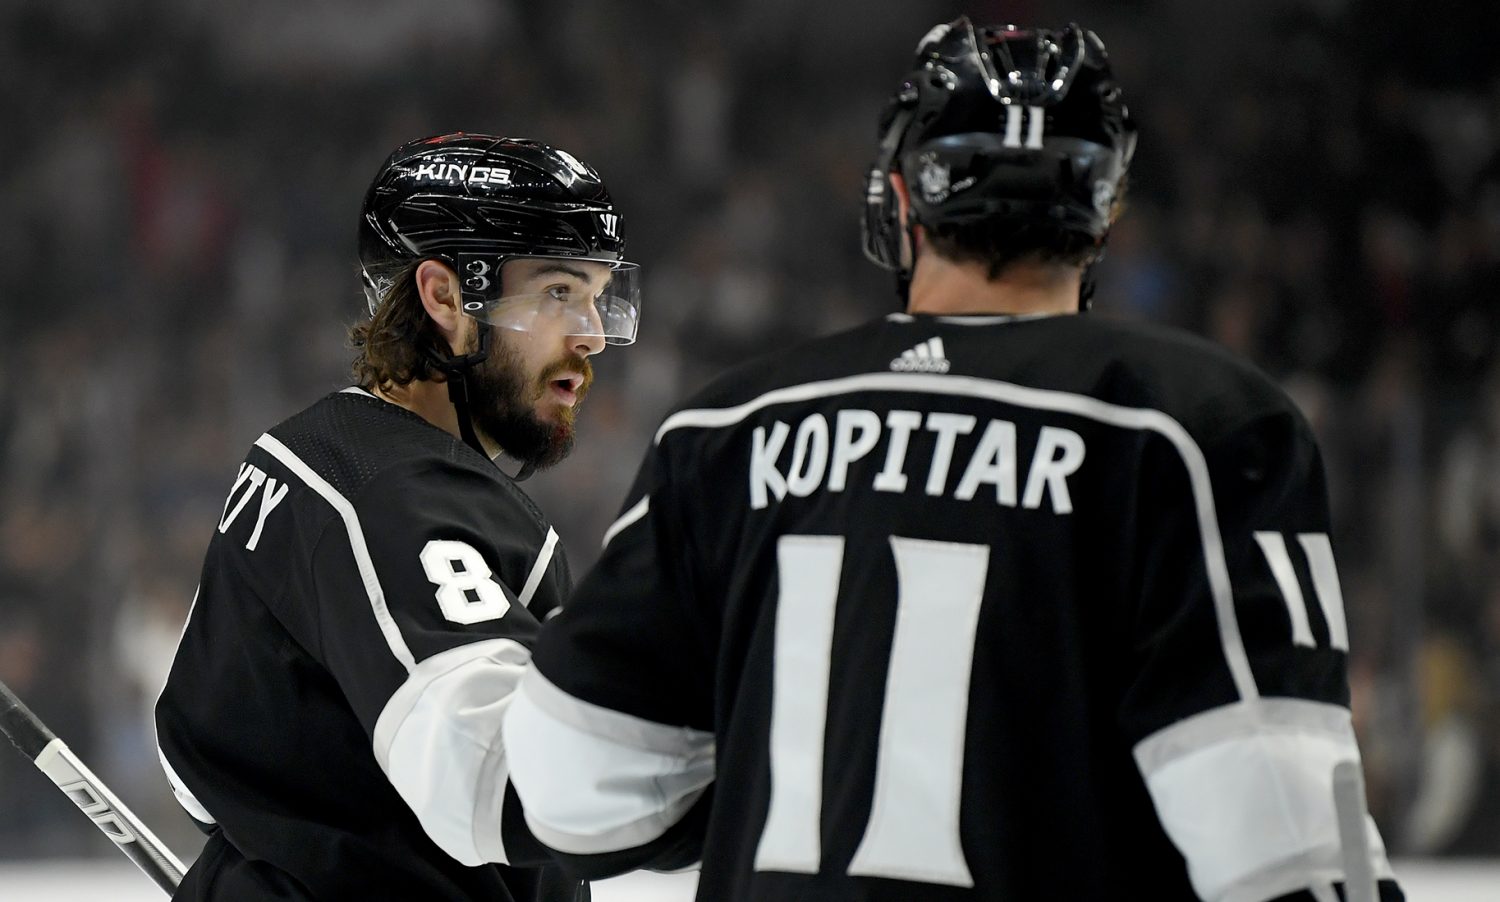 LA Kings' Doughty, Ducks' Gibson to represent SoCal hockey in NHL All-Star  Game West & SoCal News - Bally Sports